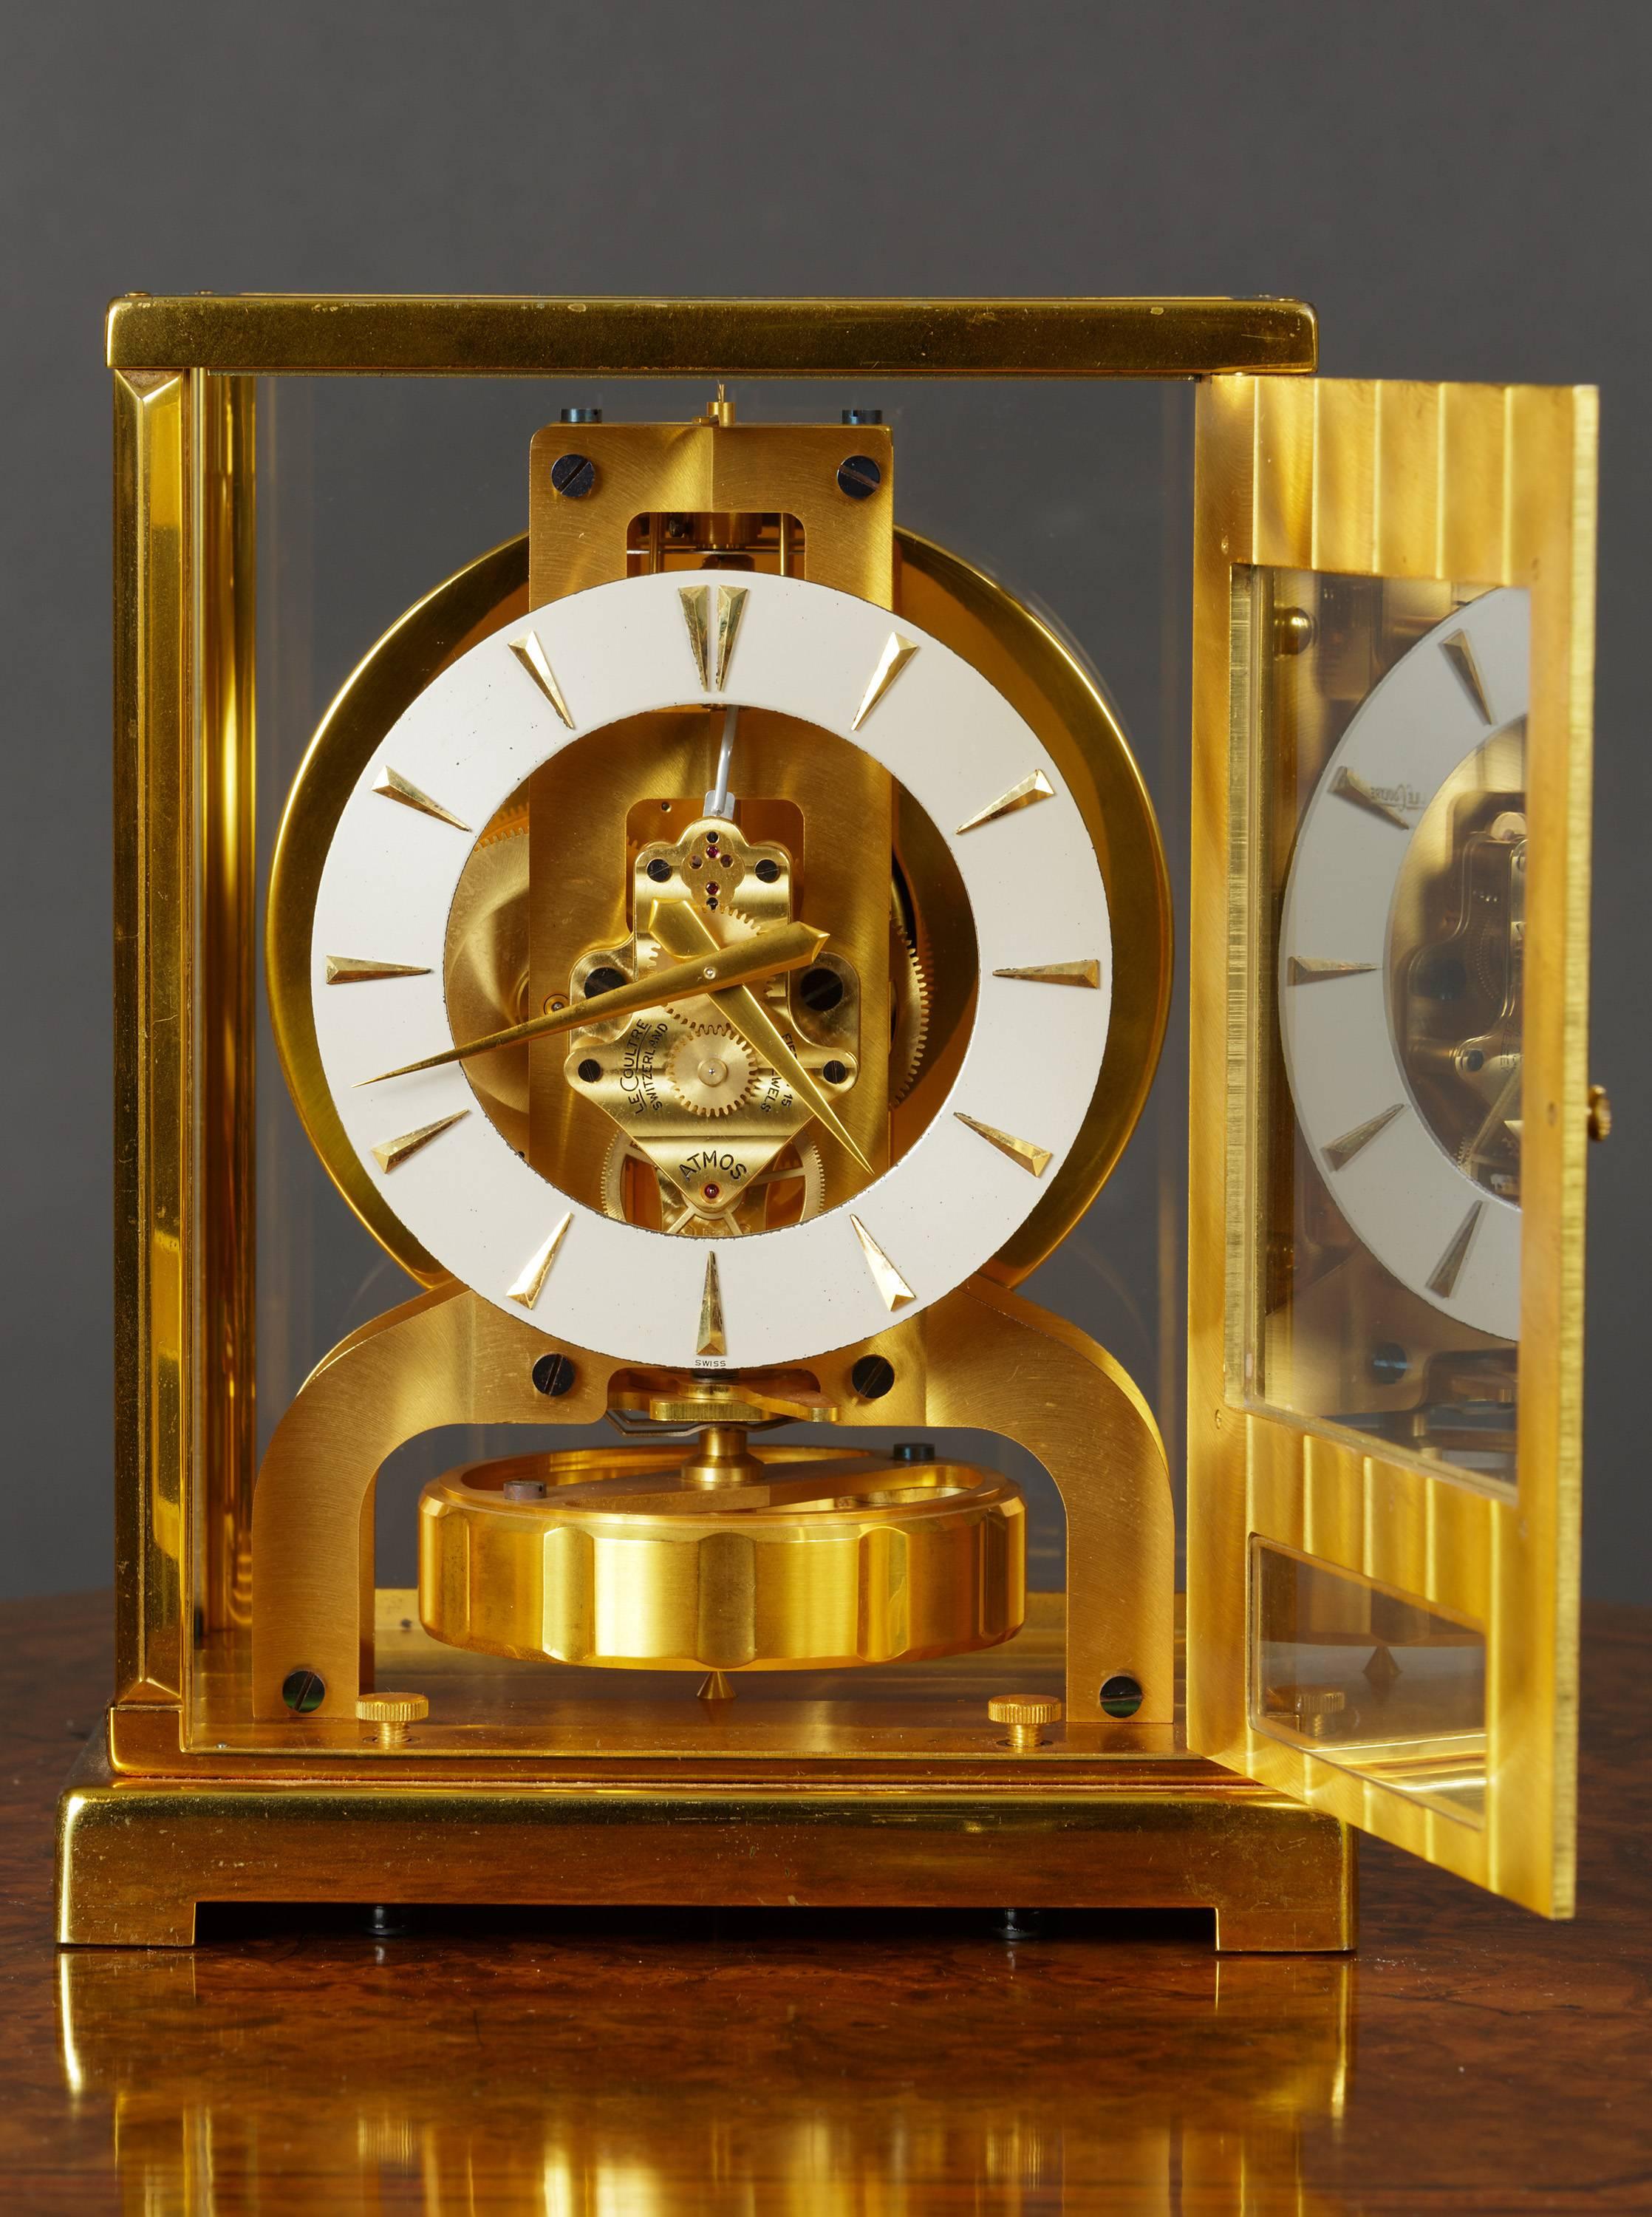 Gold plated Jaeger Le Coultre Atmos ‘Tuxedo’ clock.

Ruby jewelled movement signed ‘Jaeger Le Coultre’.

Silvered dial with baton numerals and original gold plated hands. Oscillating indented disc pendulum. Opening glazed front